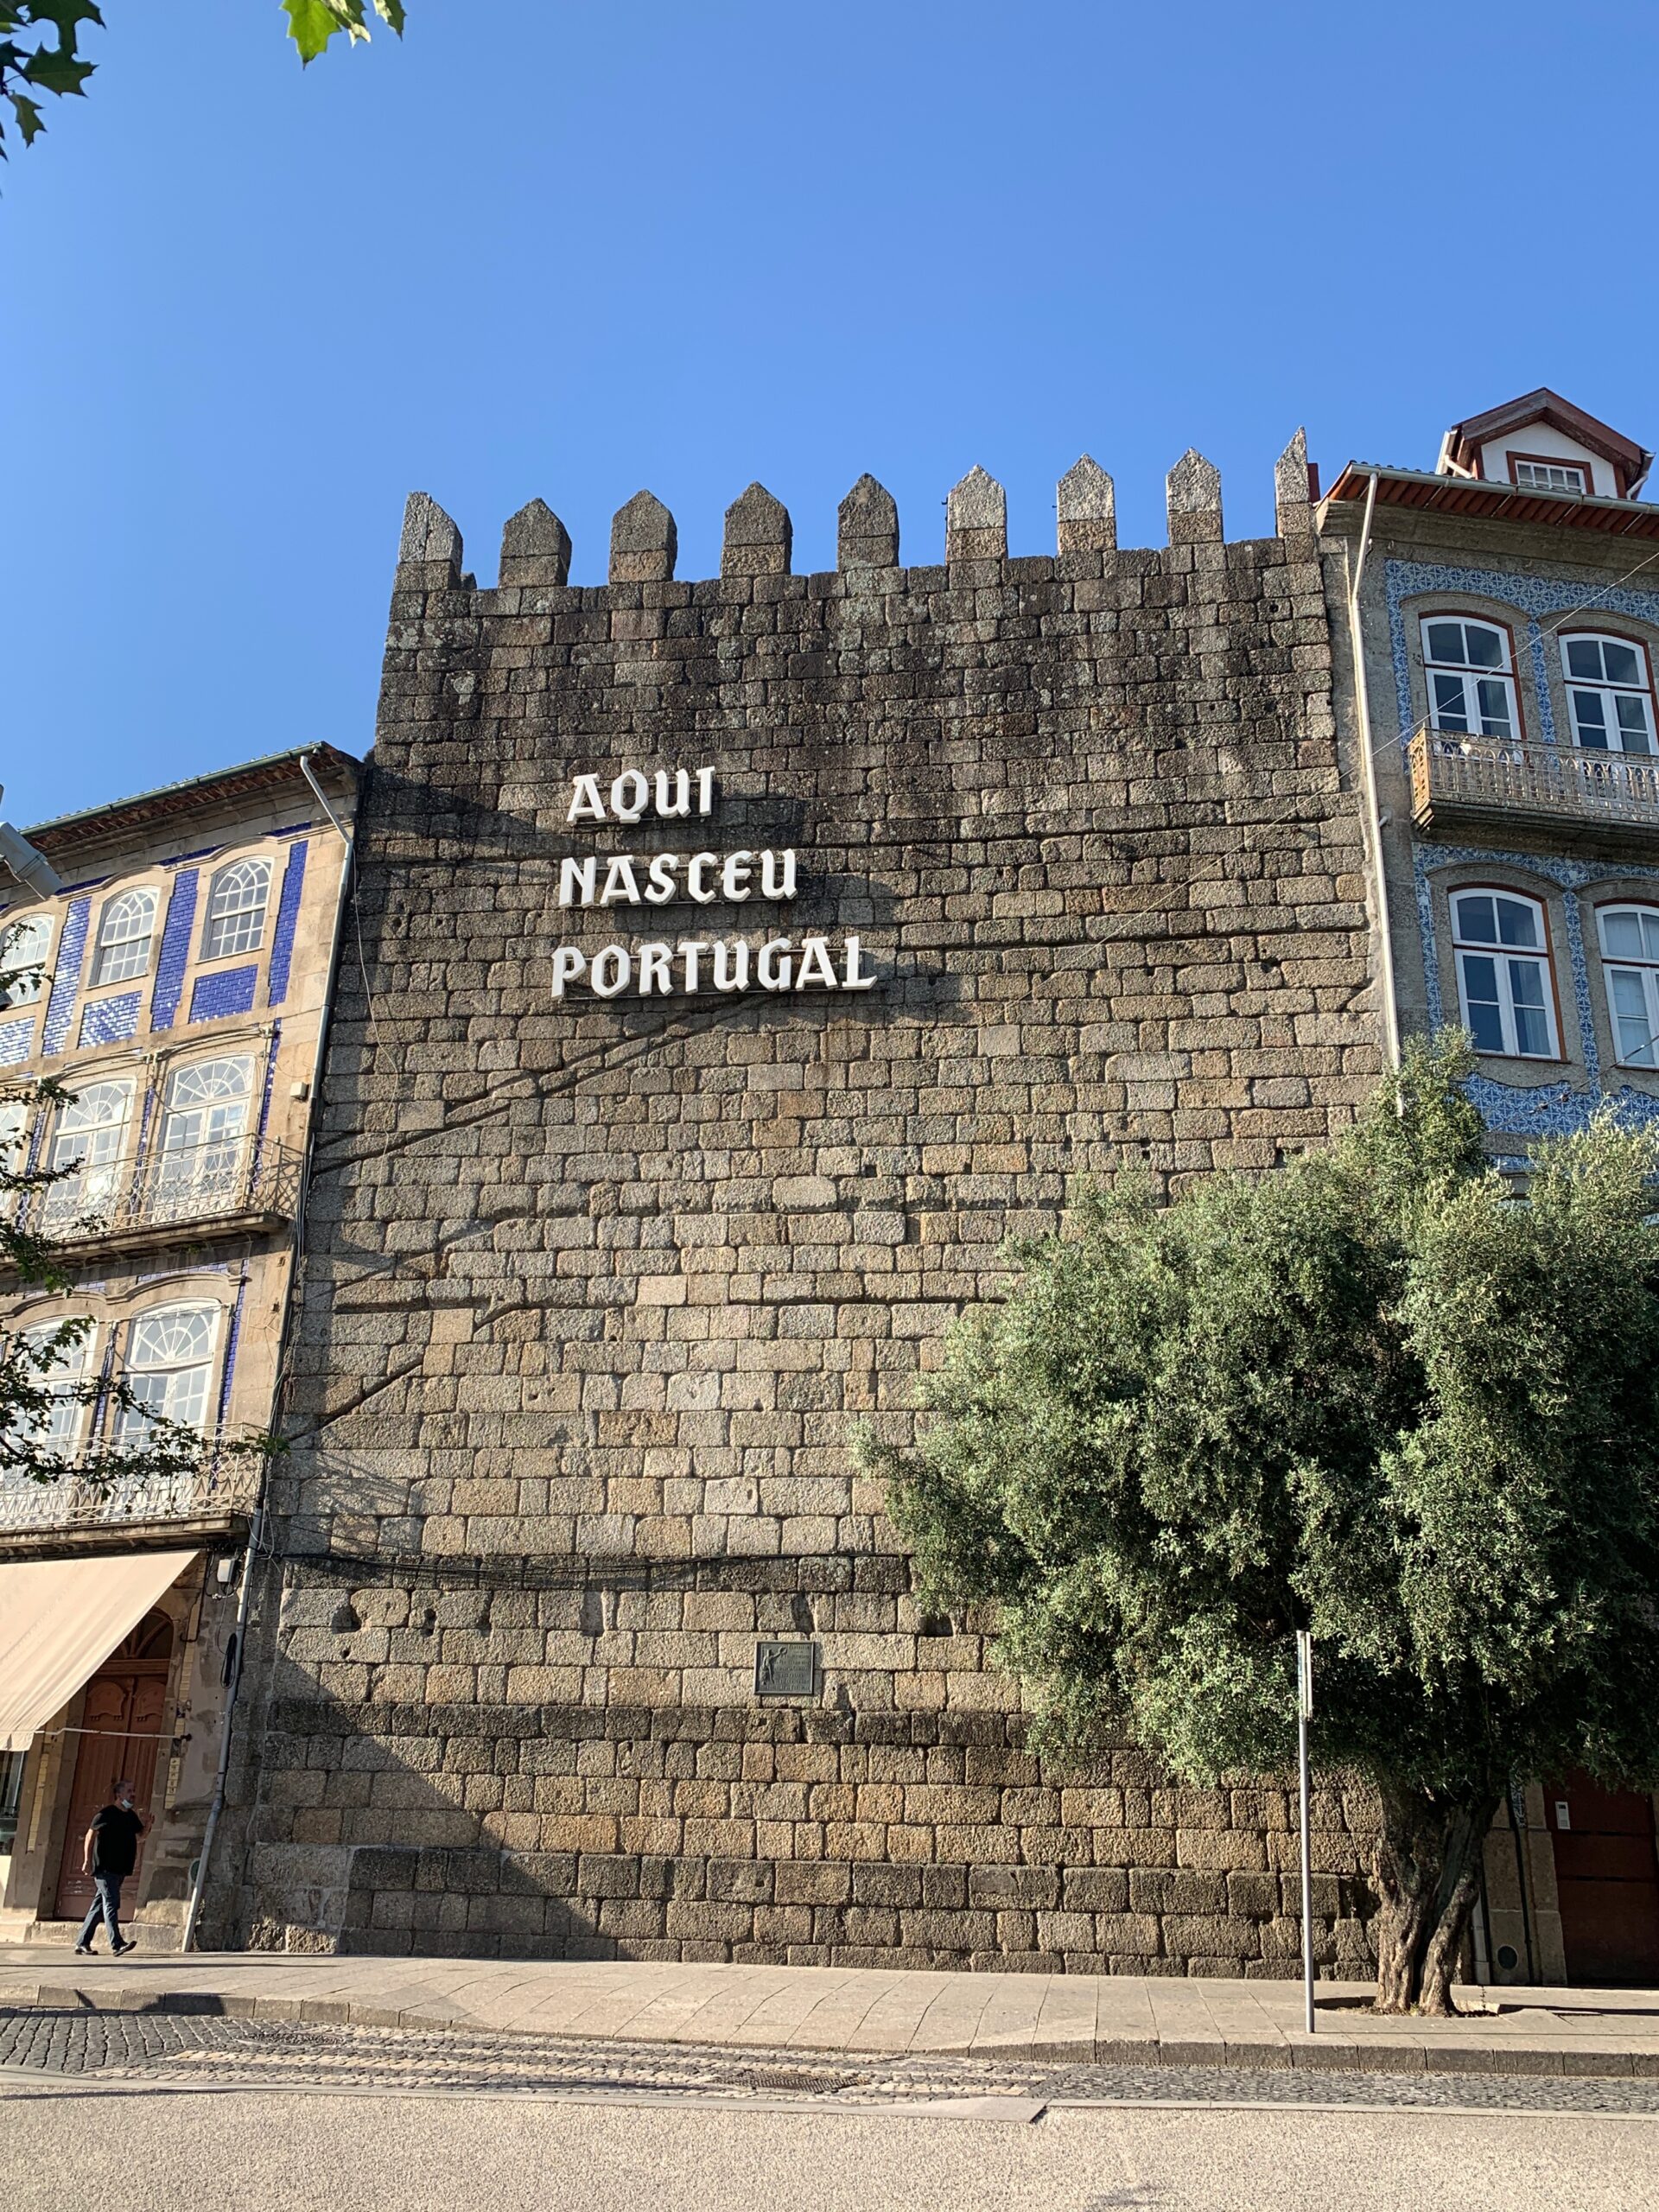 View of Guimarães medieval city wall with lettering stating that 'Portugal was born here', in reference to the city being Afonso Henrique's birthplace.